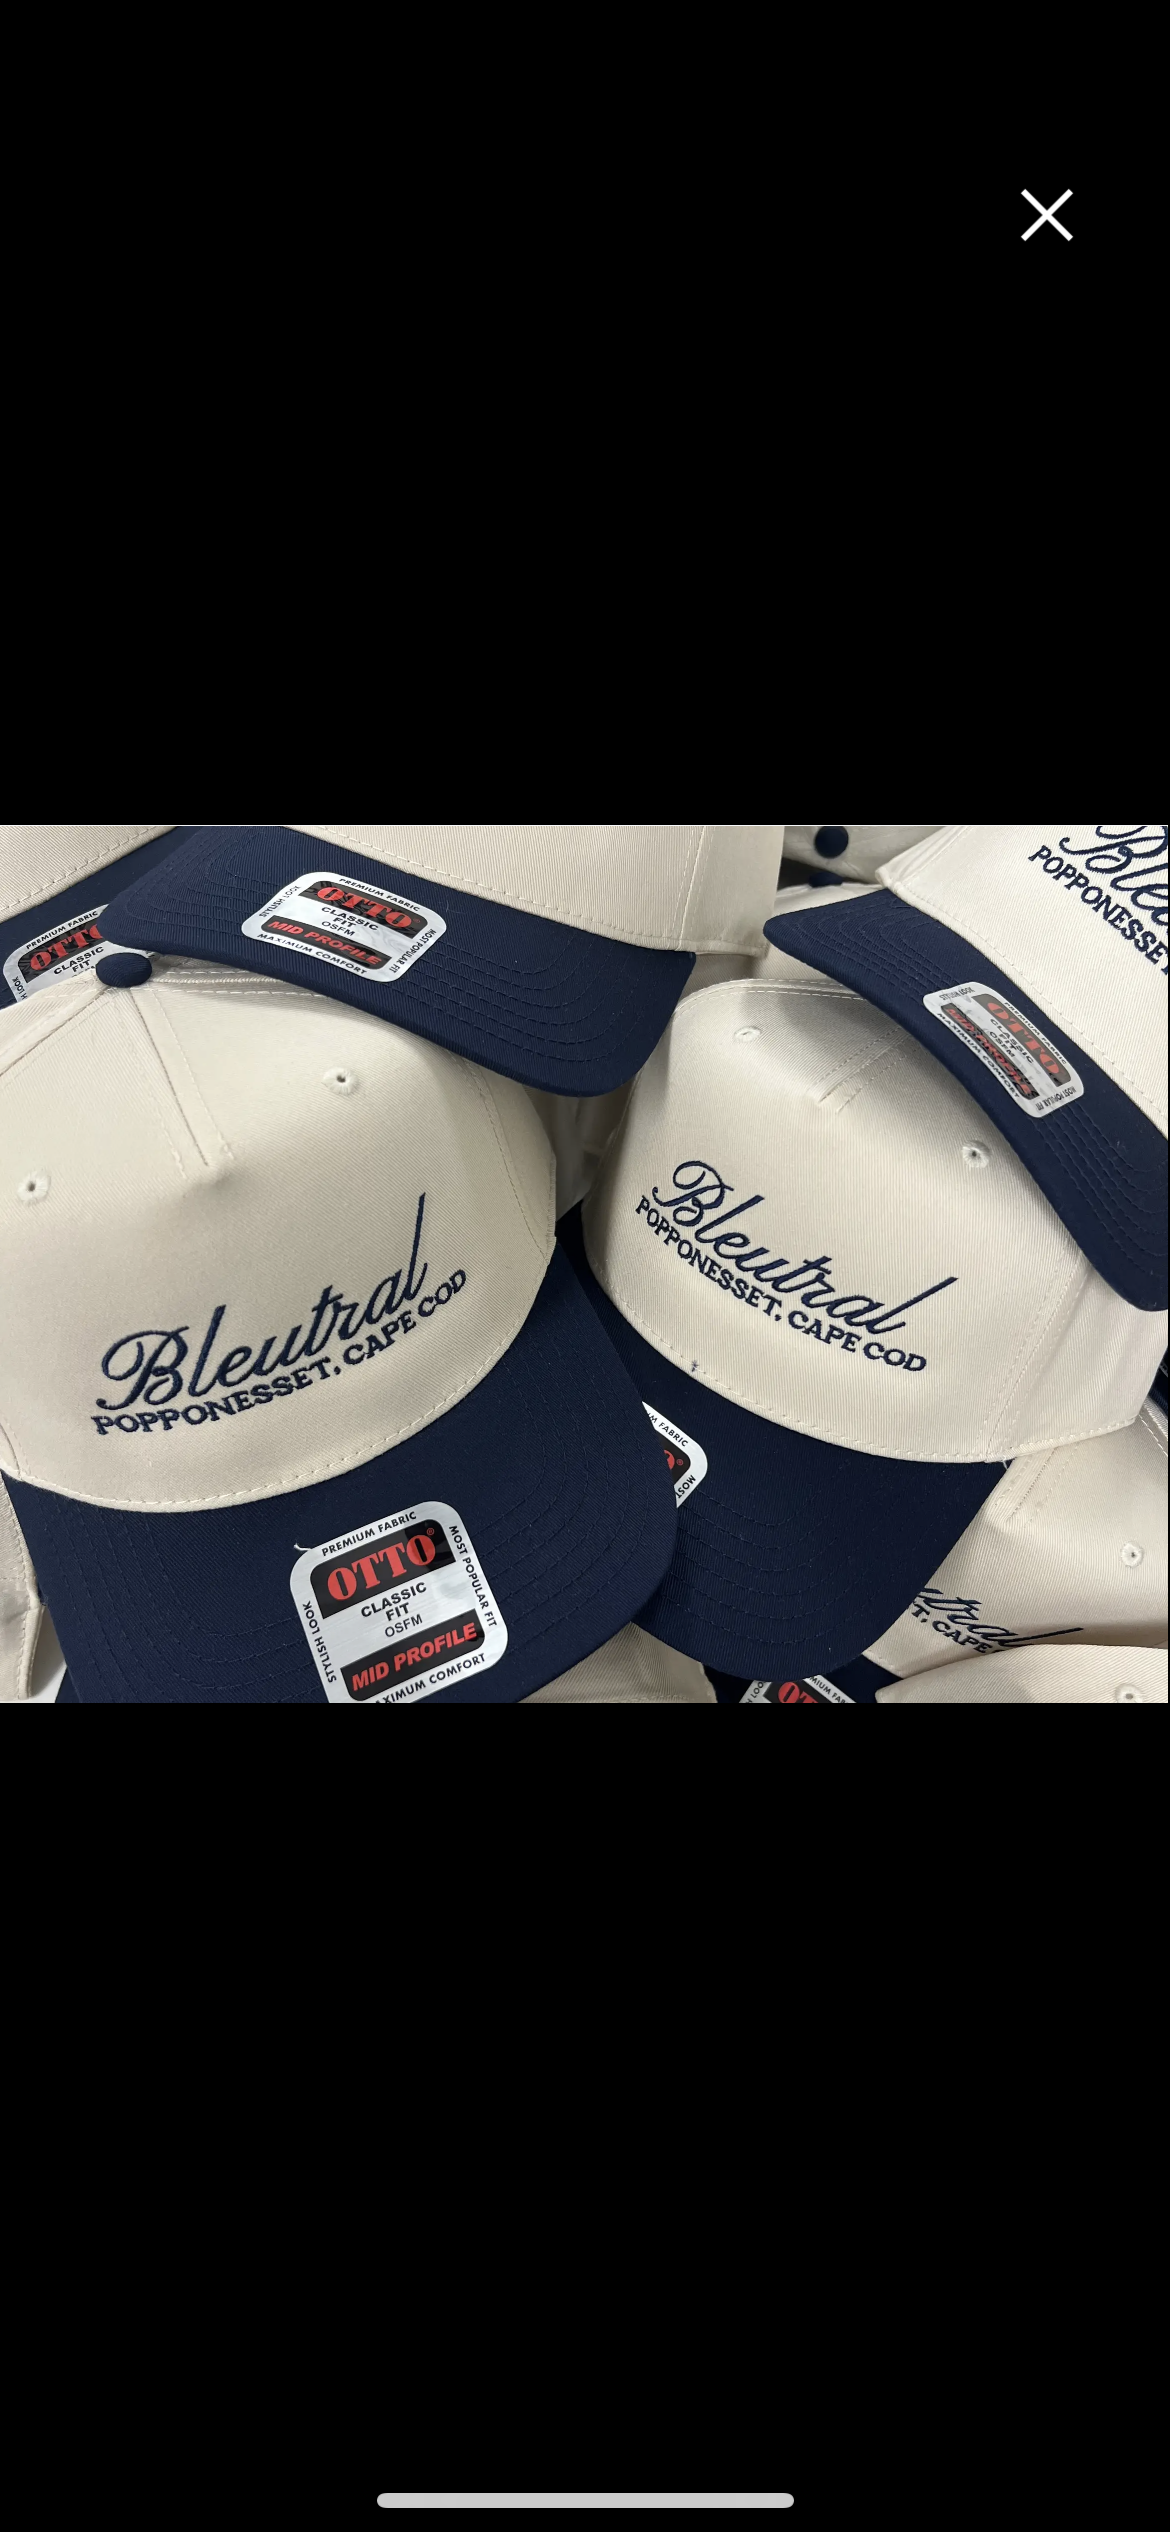 Bleutral On The Cape Trucker